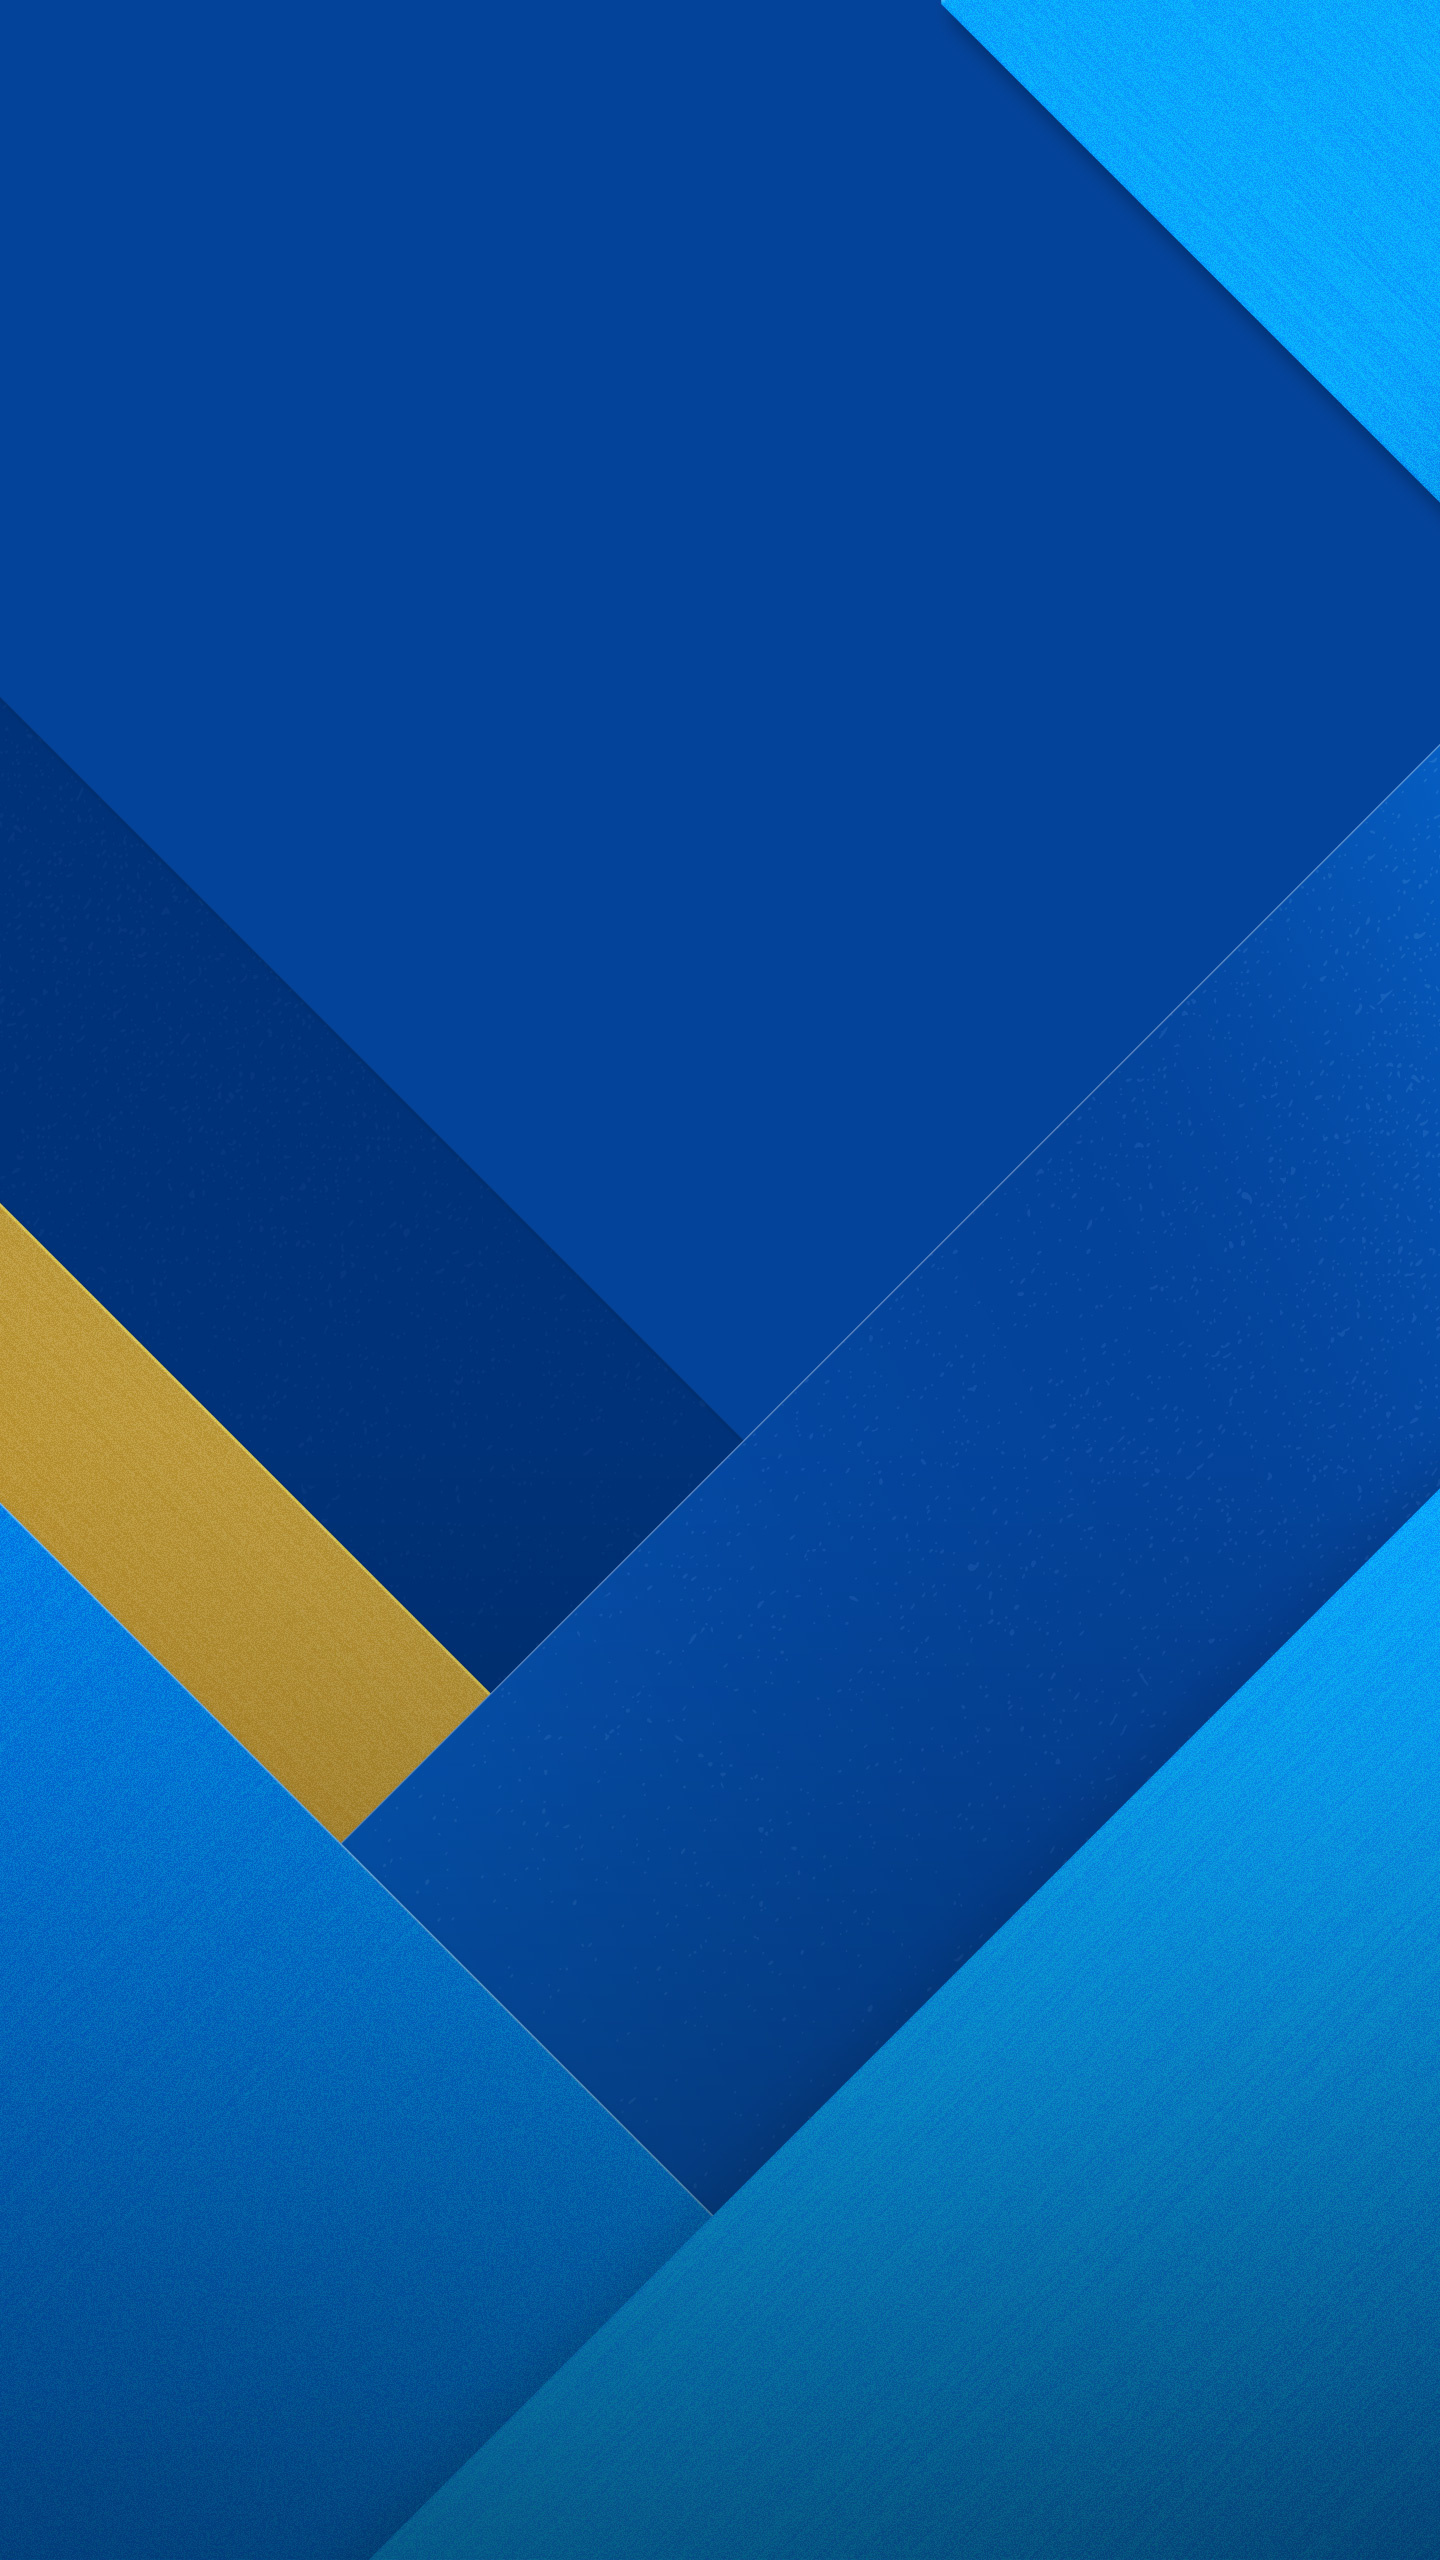 Download wallpaper 1440x2560 geometric, material design, stock blue,  abstract, qhd samsung galaxy s6, s7, edge, note, lg g4, 1440x2560 hd  background, 345